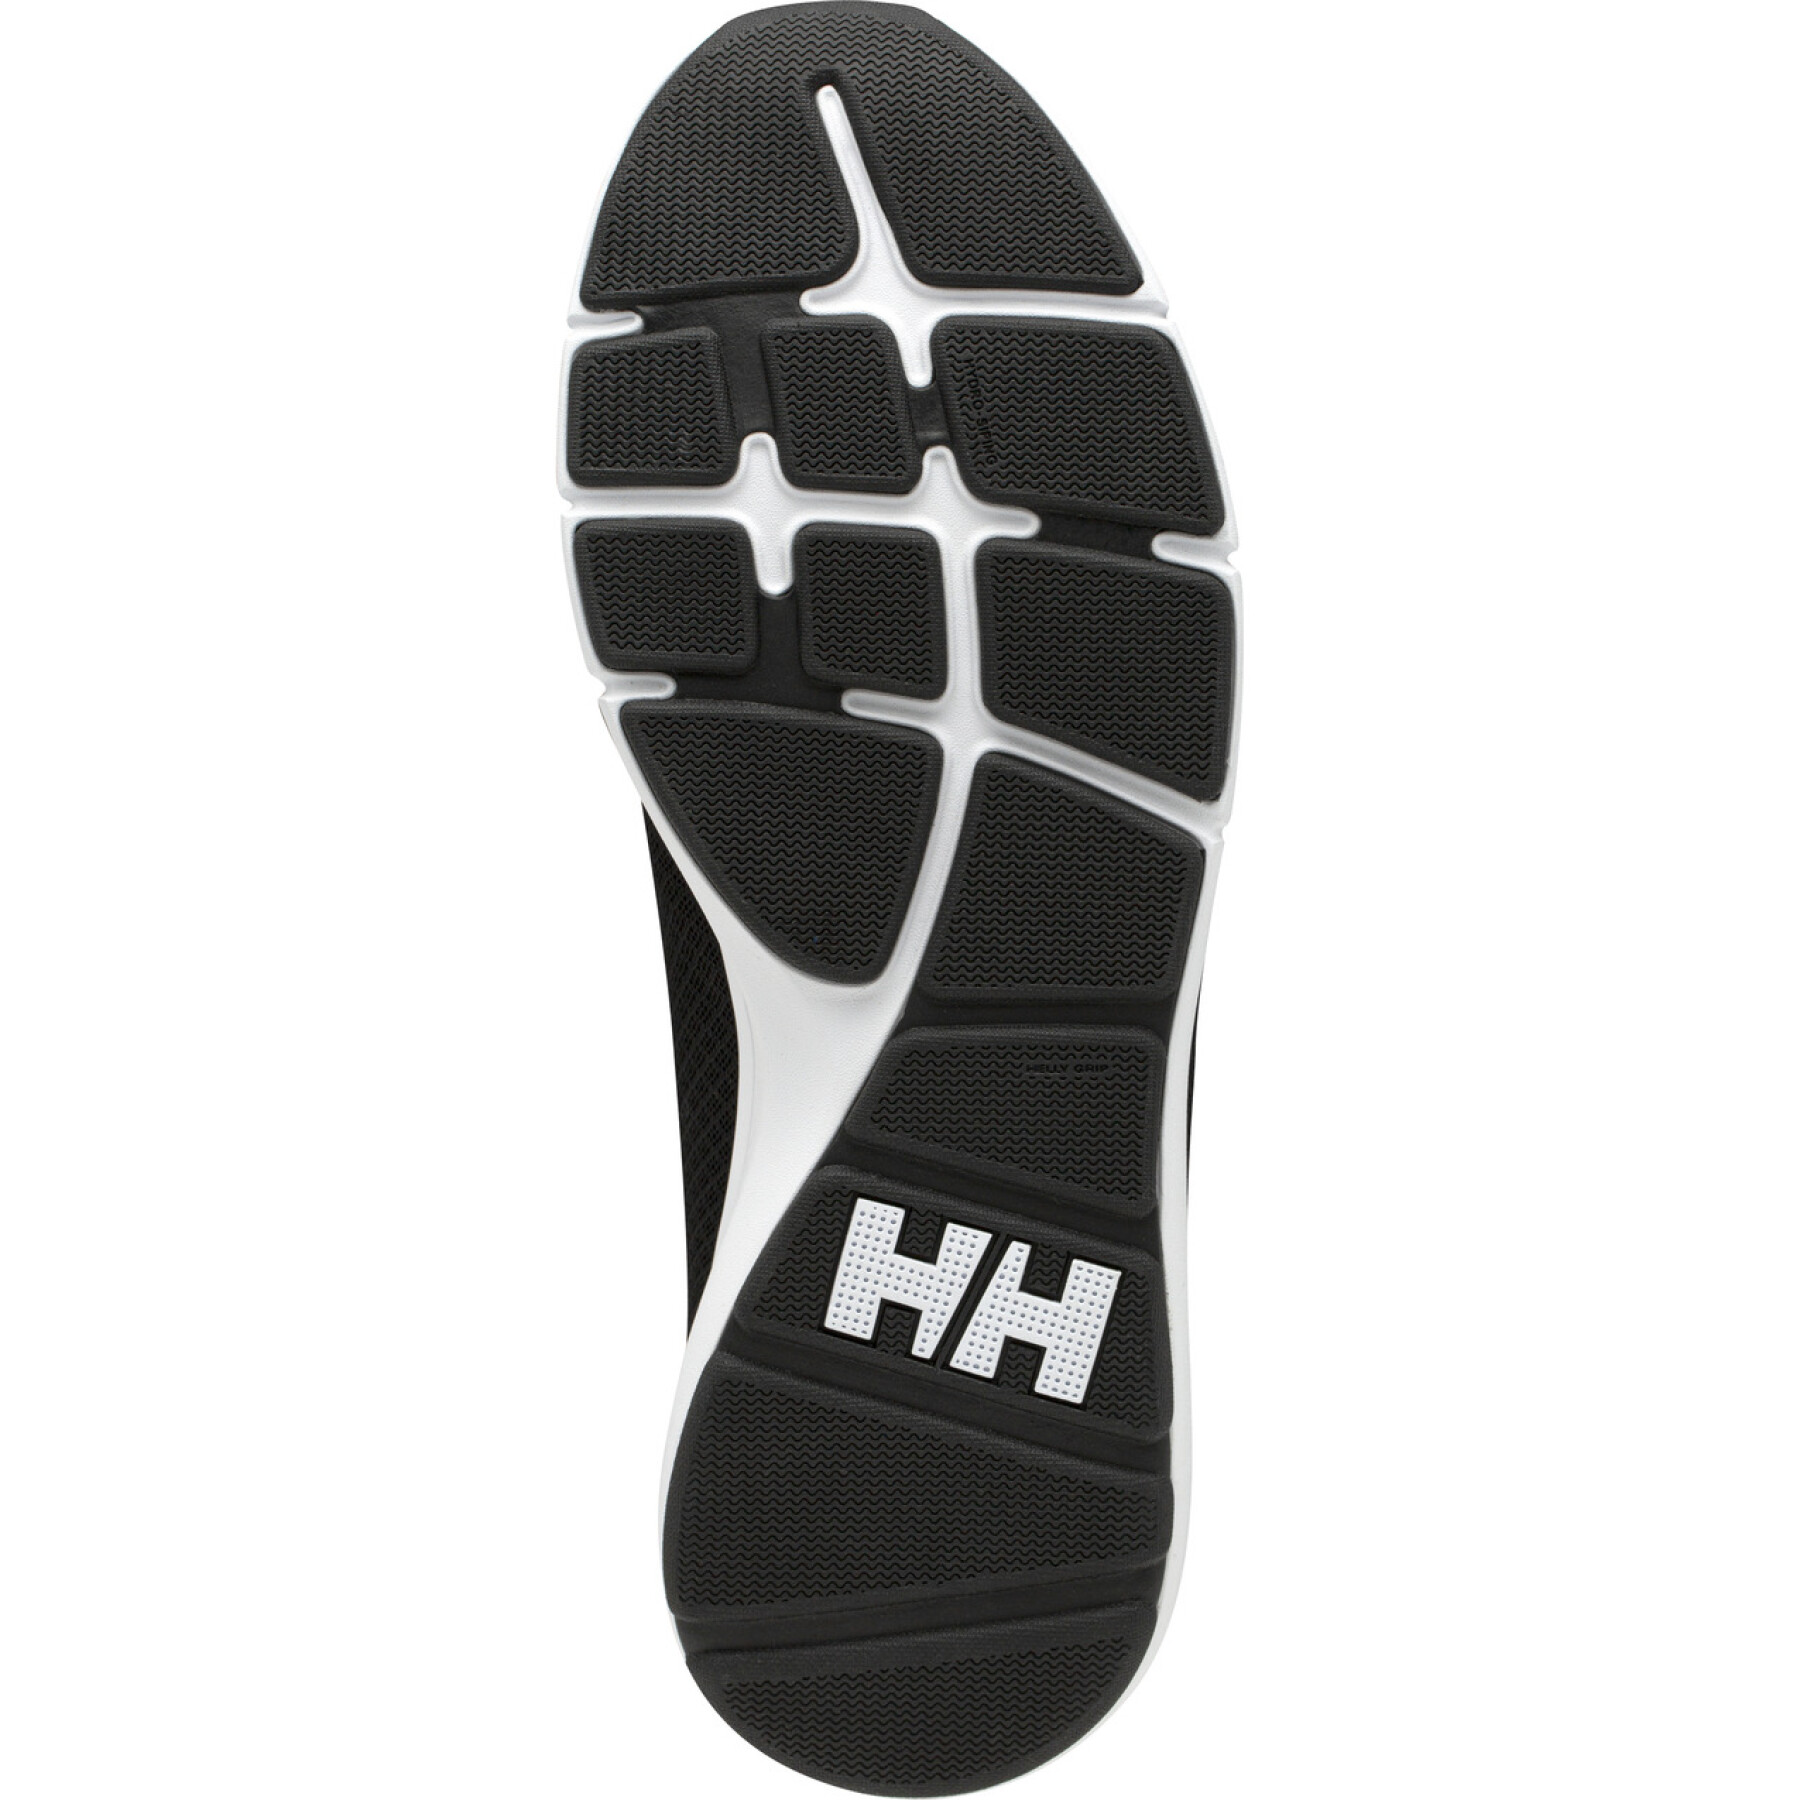 Walking shoes Helly Hansen Feathering